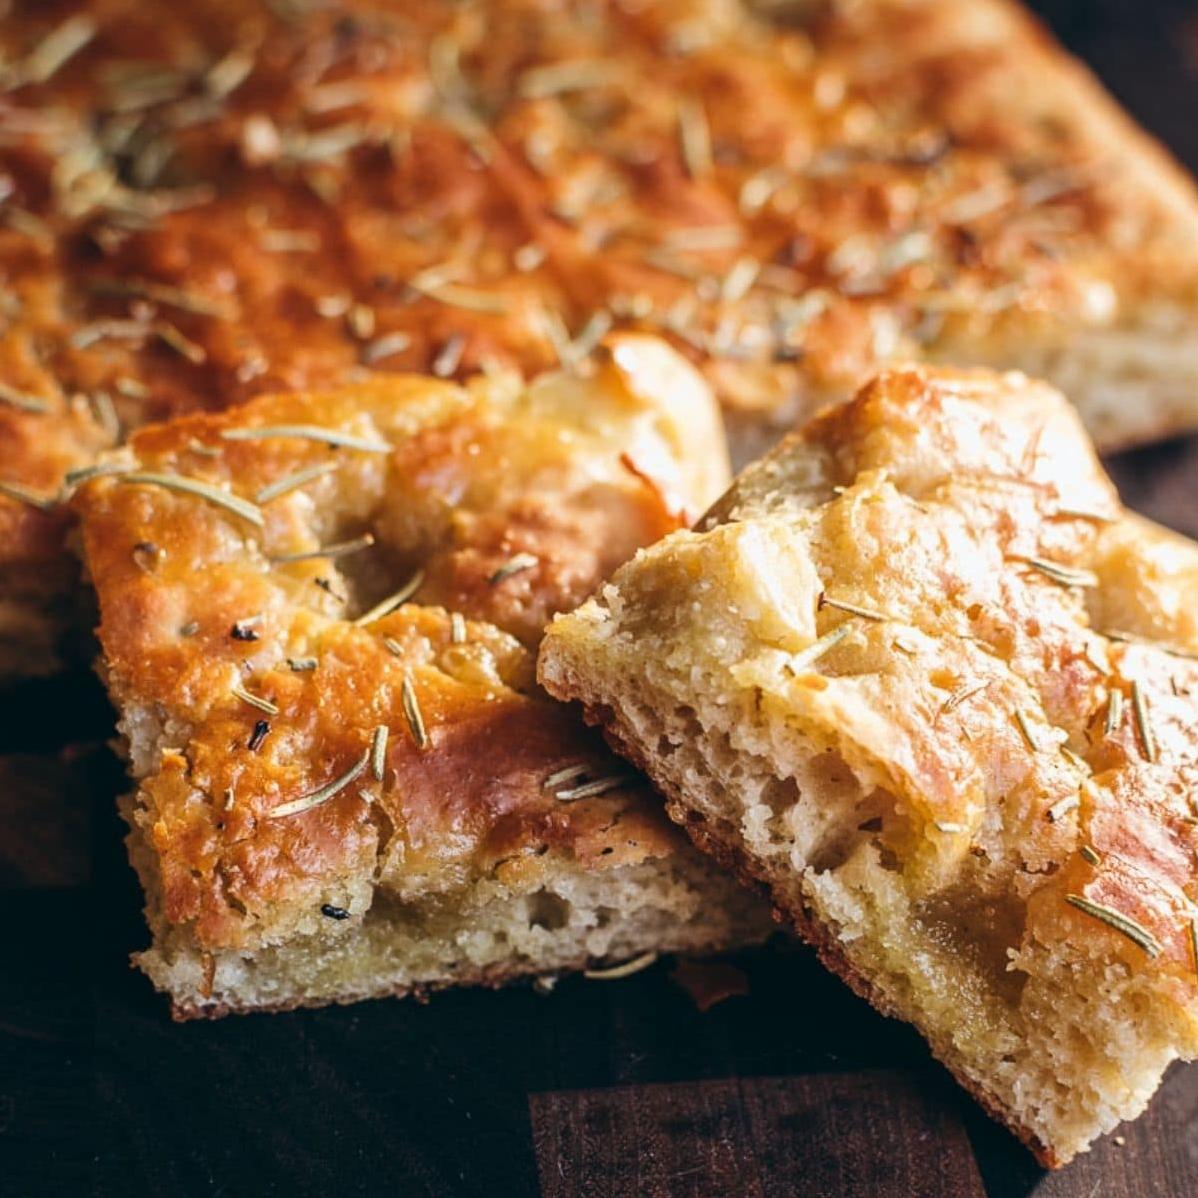  Enjoy the taste of Italy with this delicious bread.